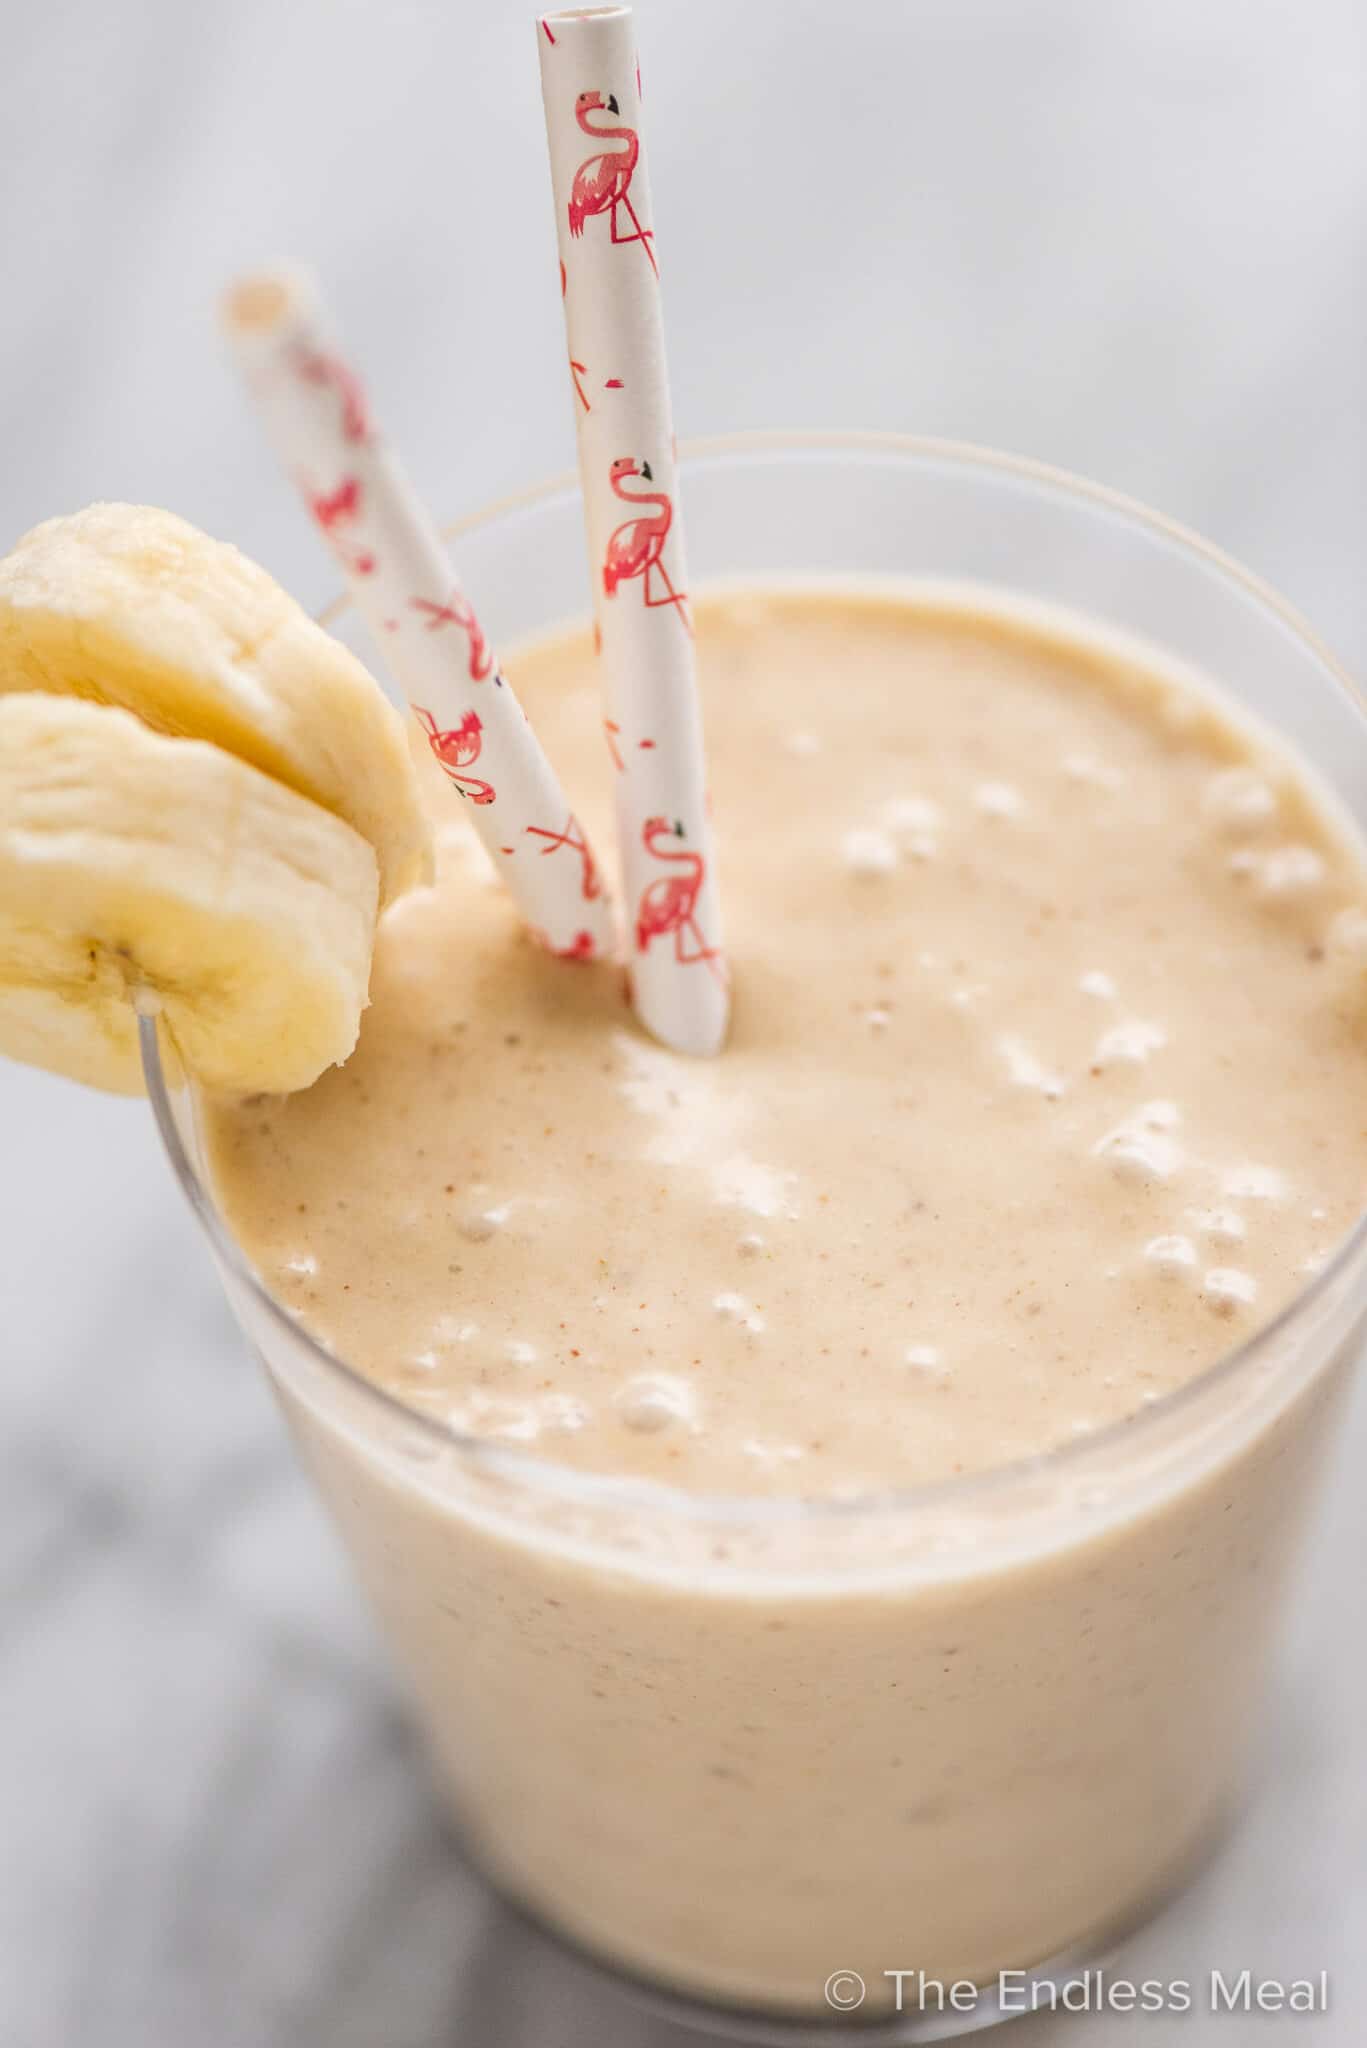 A Peanut Butter Banana Smoothie in a cup with straws.